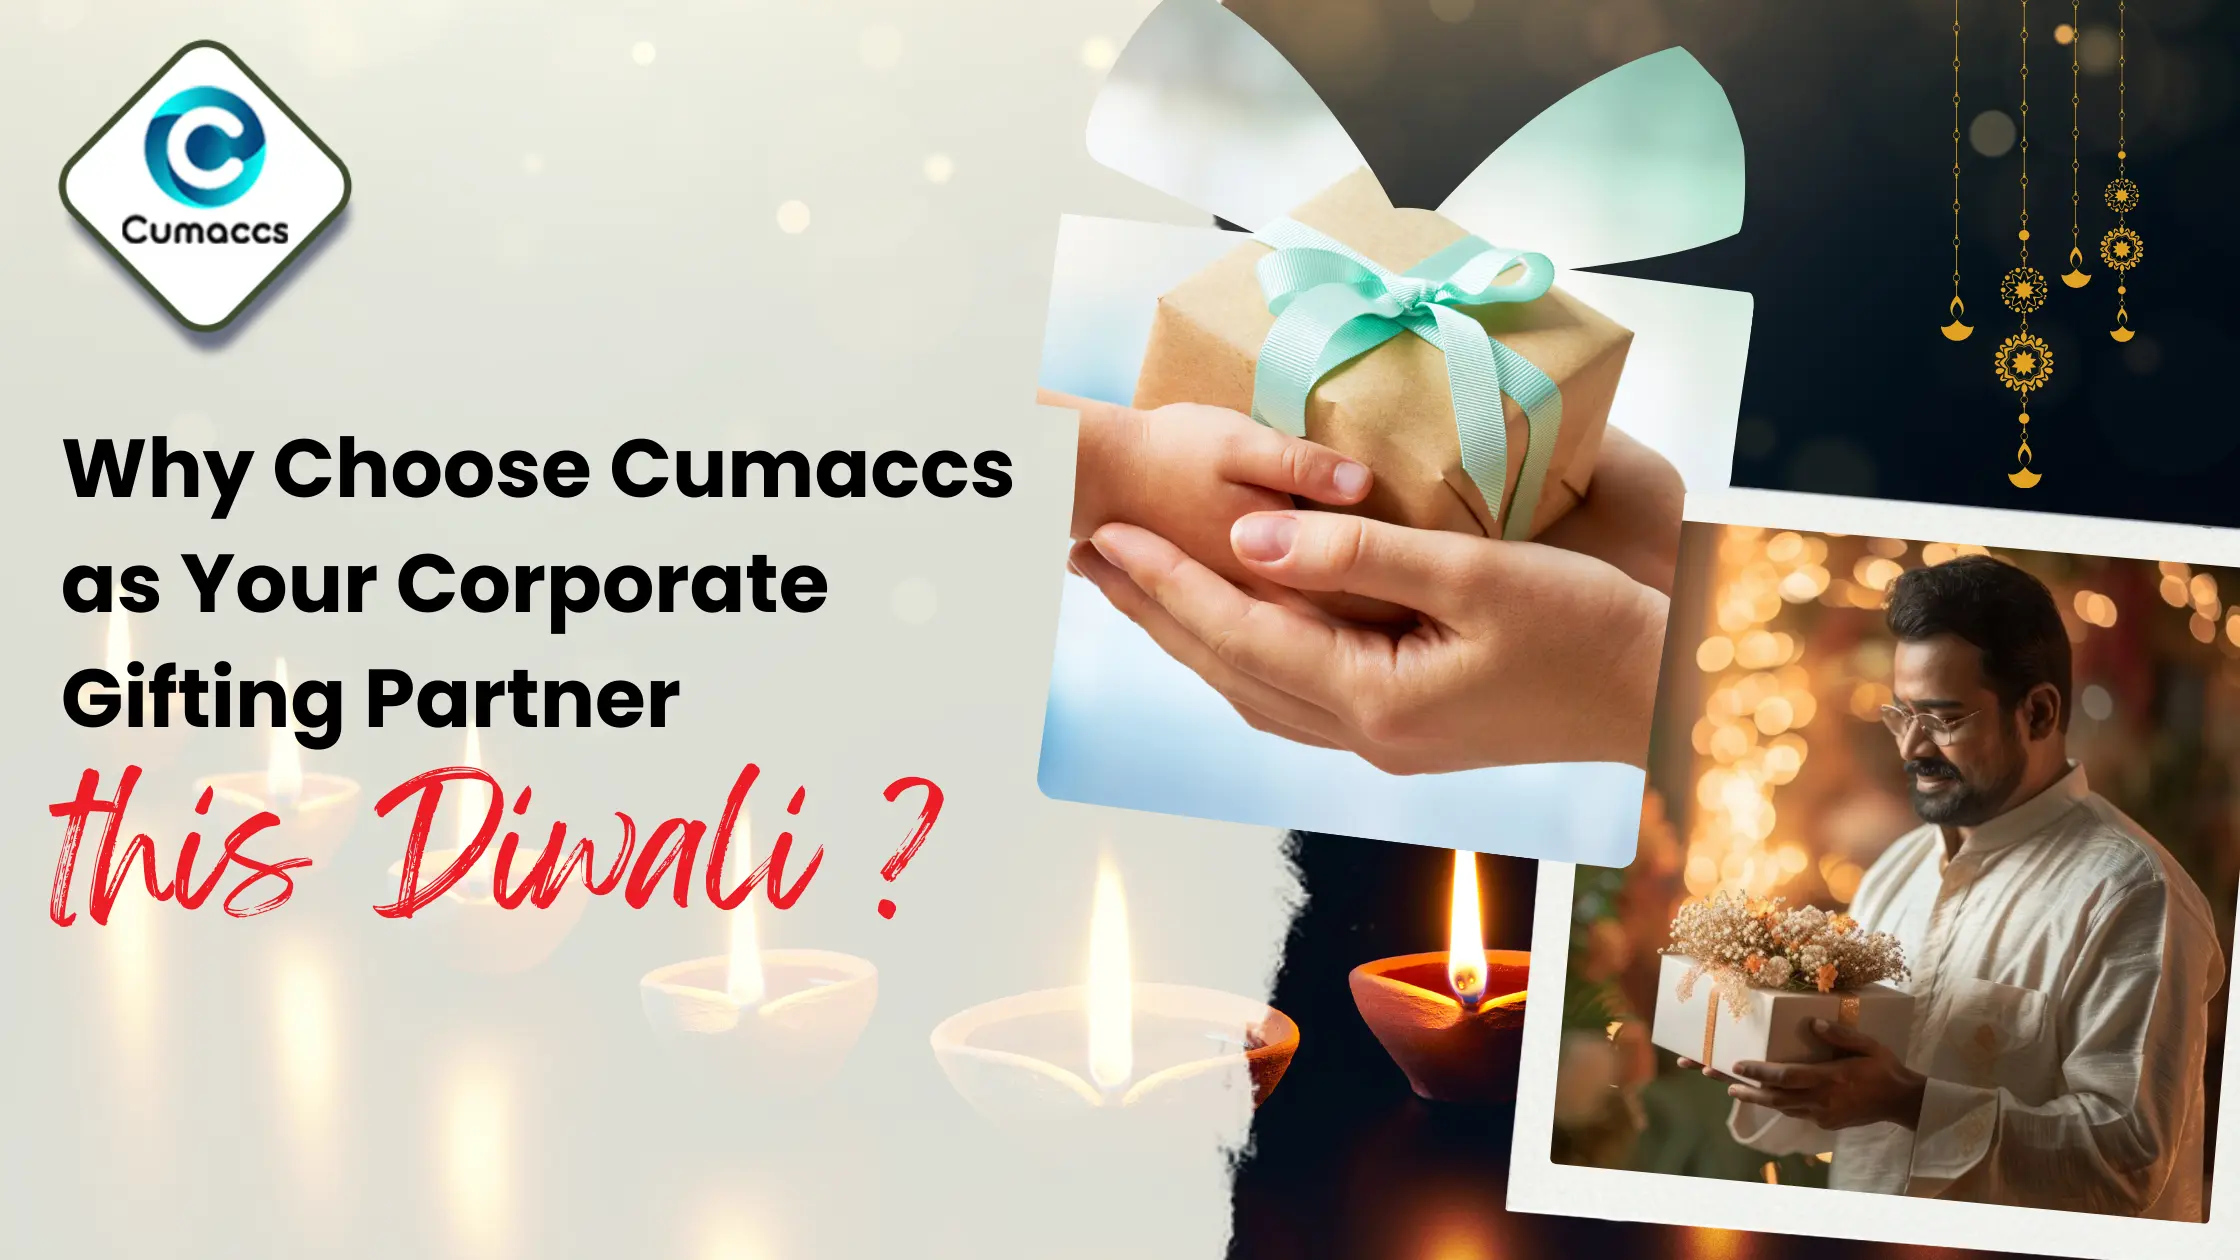 You are currently viewing Why Choose Cumaccs as Your Corporate Gifting Partner this Diwali?